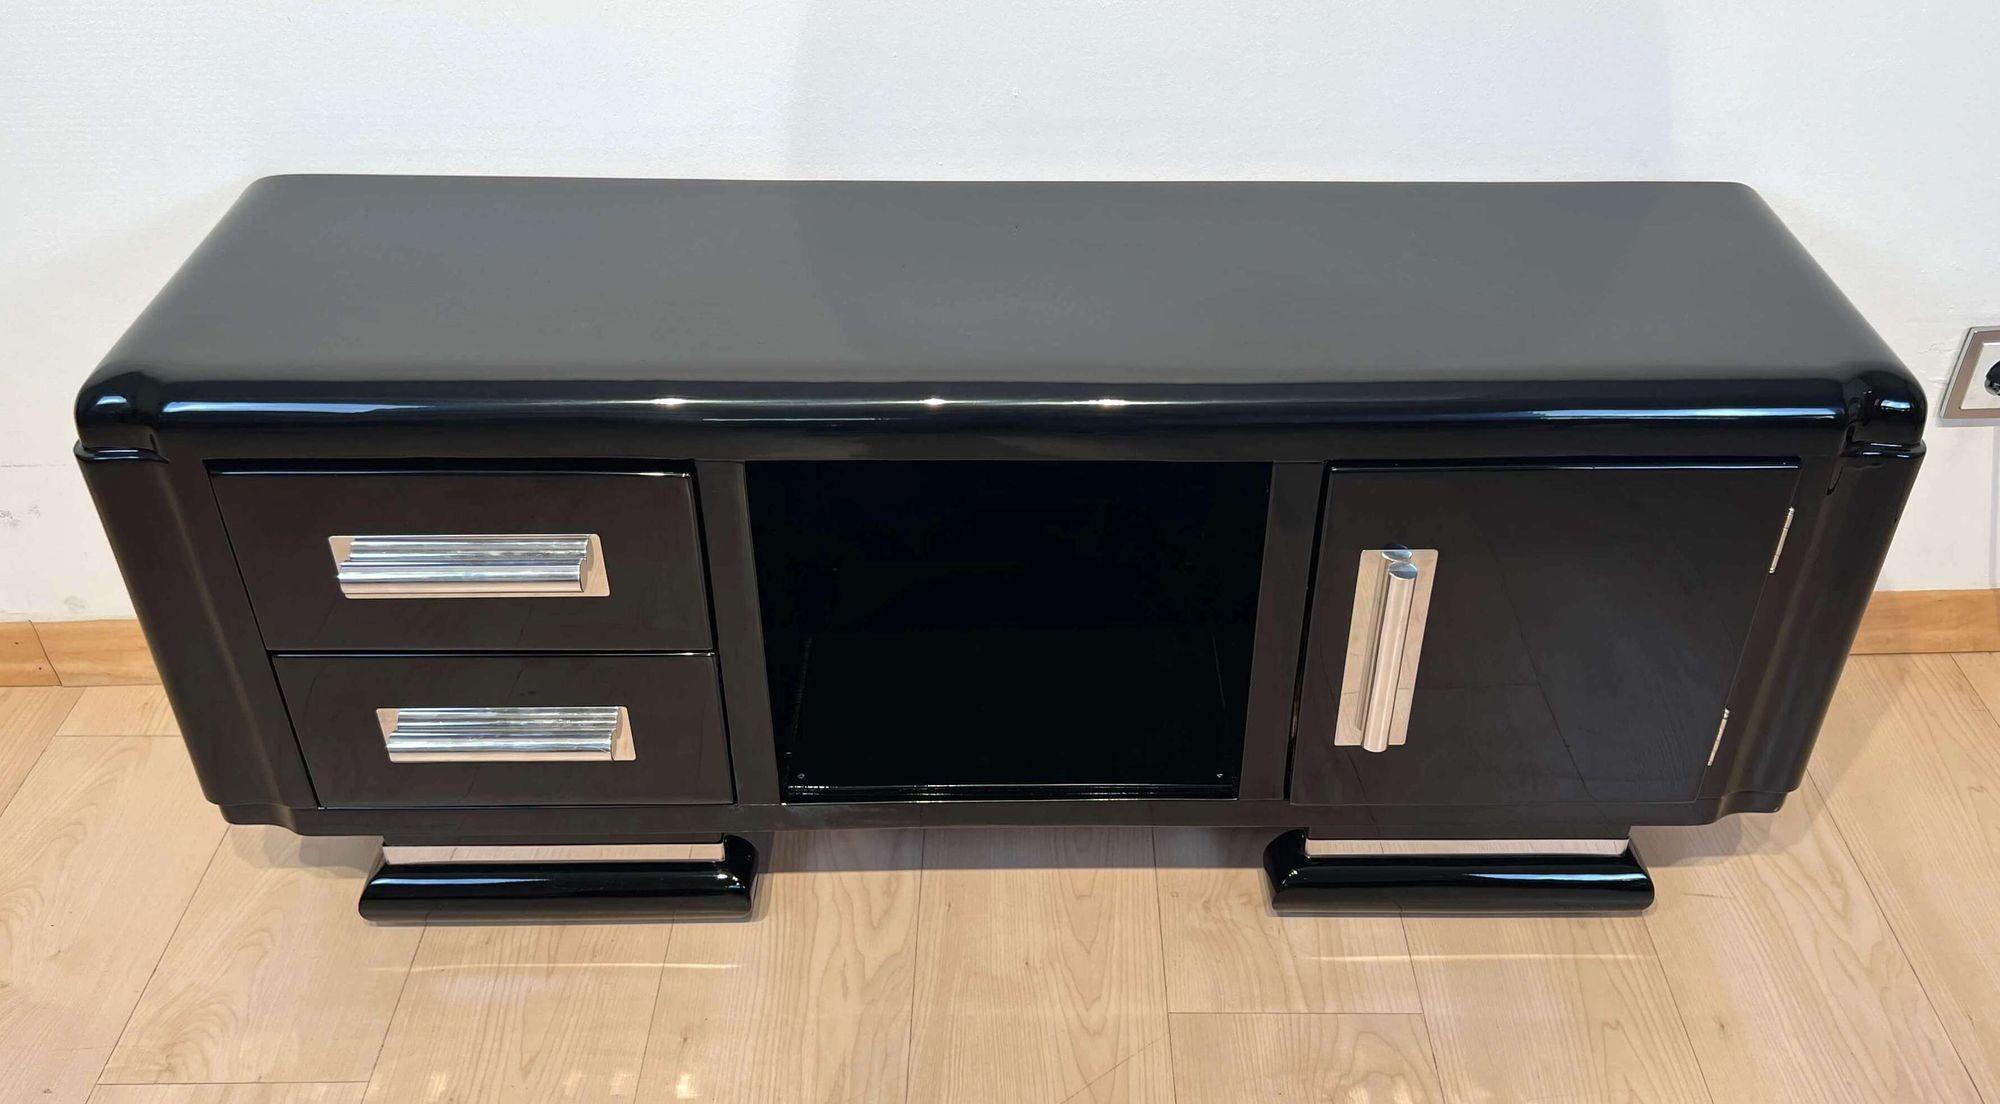 Petite Art Deco lowboard / low sideboard / TV board from Italy about 1940.
Walnut Veneer on softwood. black piano lacquer finish in six layers and high-gloss polished. Left 2 drawers, center 1 free compartment, right 1 door. Doors and drawers